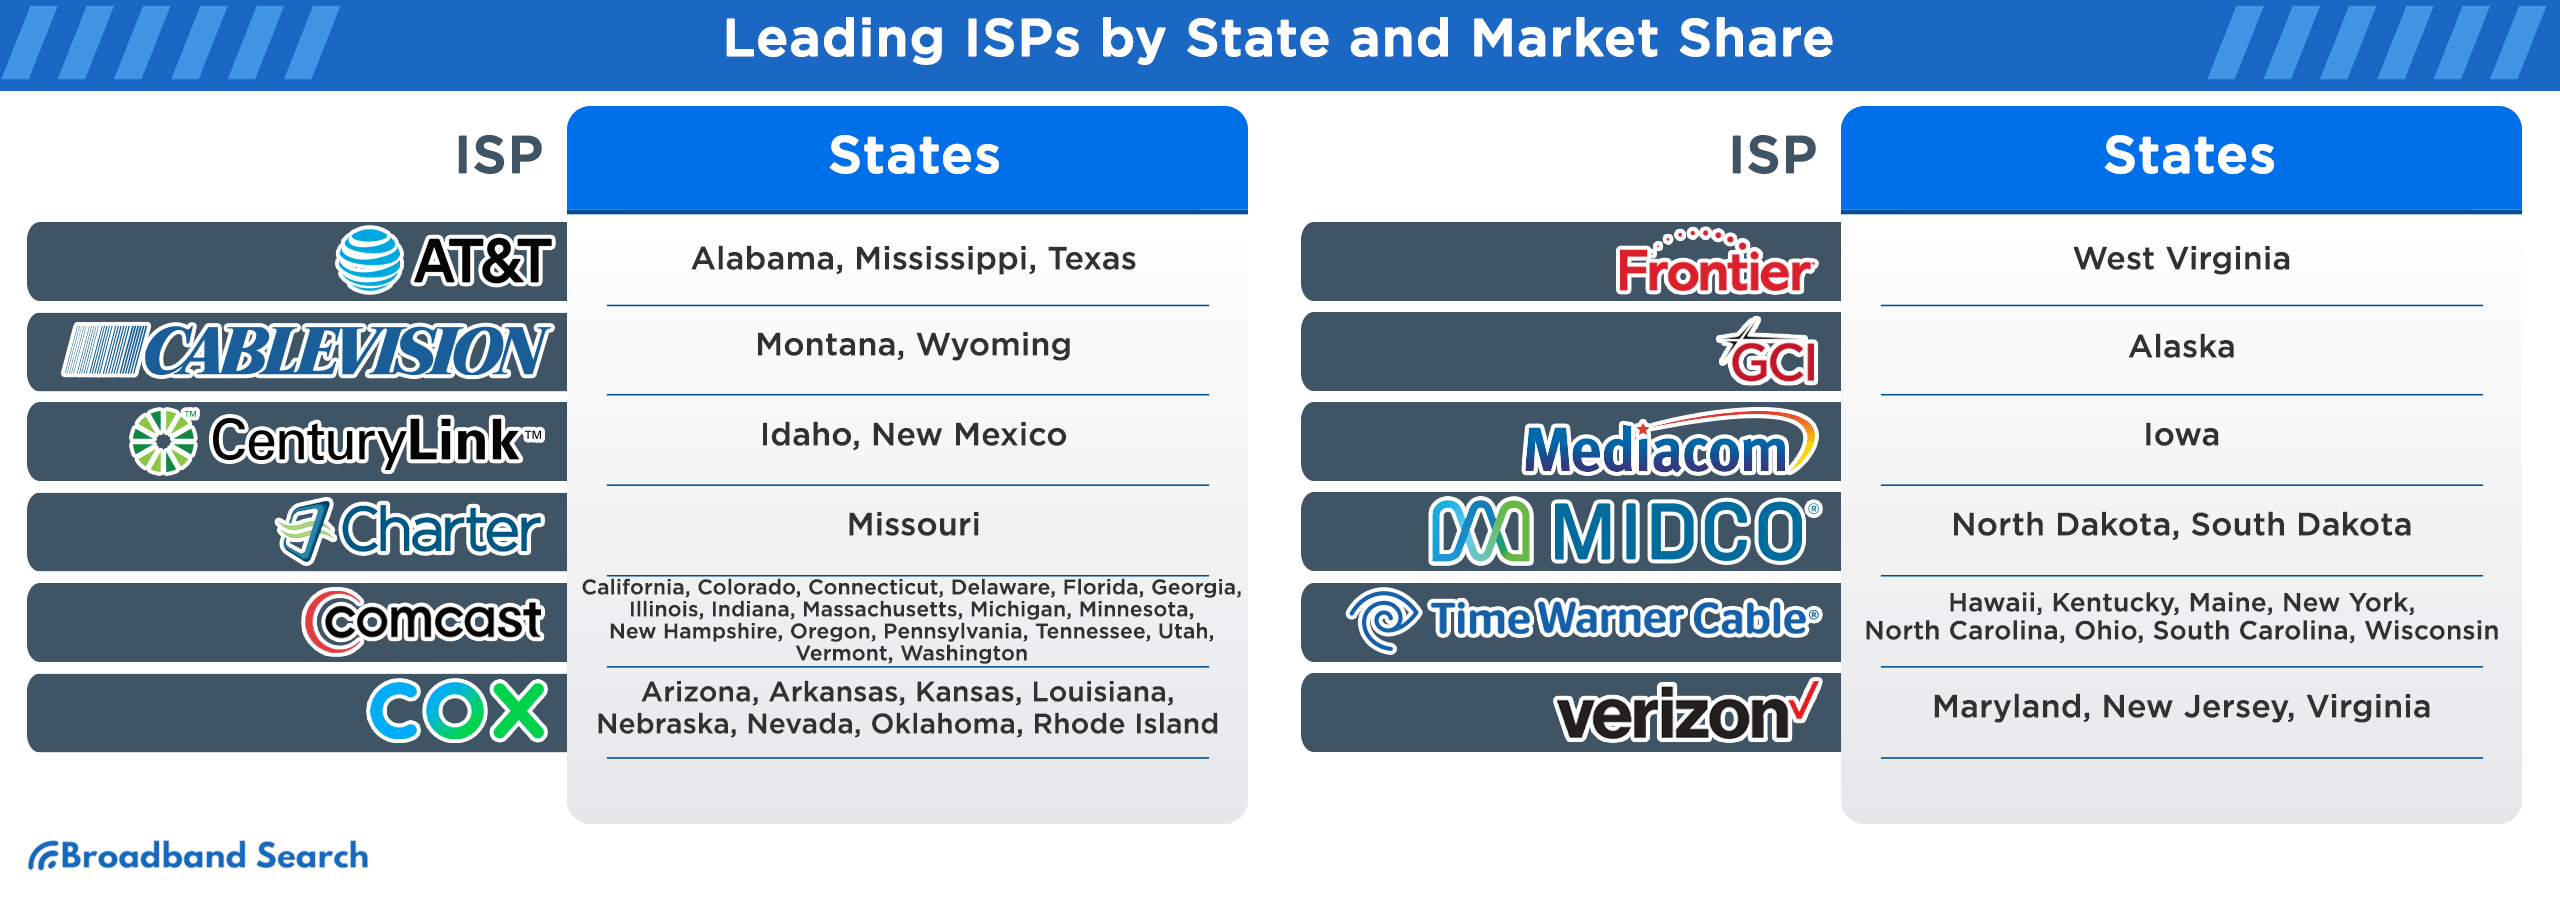 Leading ISPs by state and market share